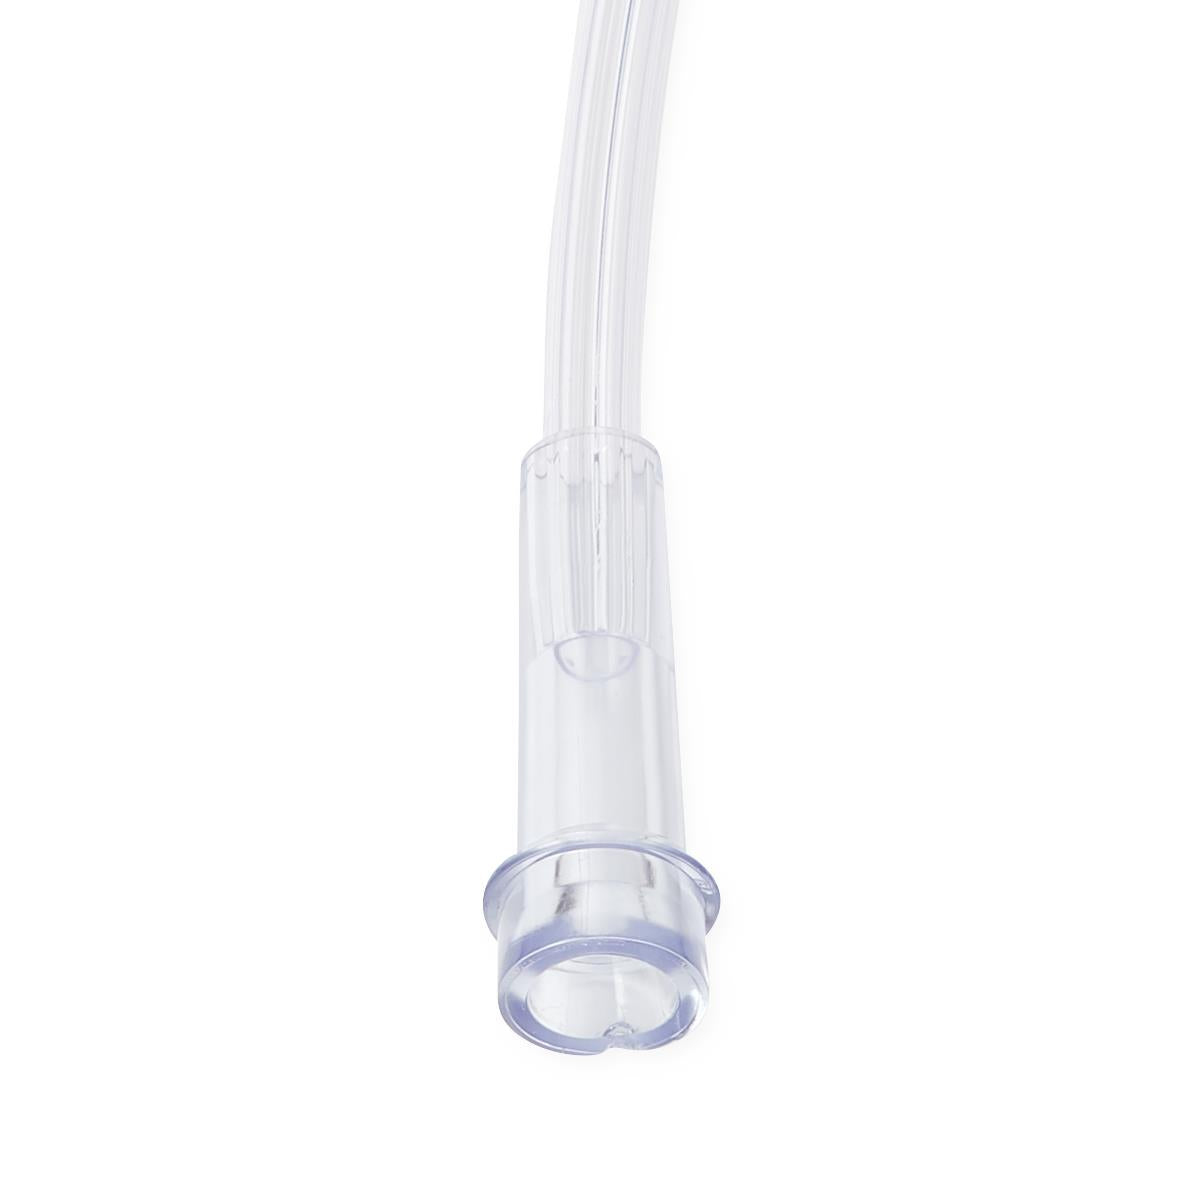 Disposable Handheld Nebulizer Kits with Mask